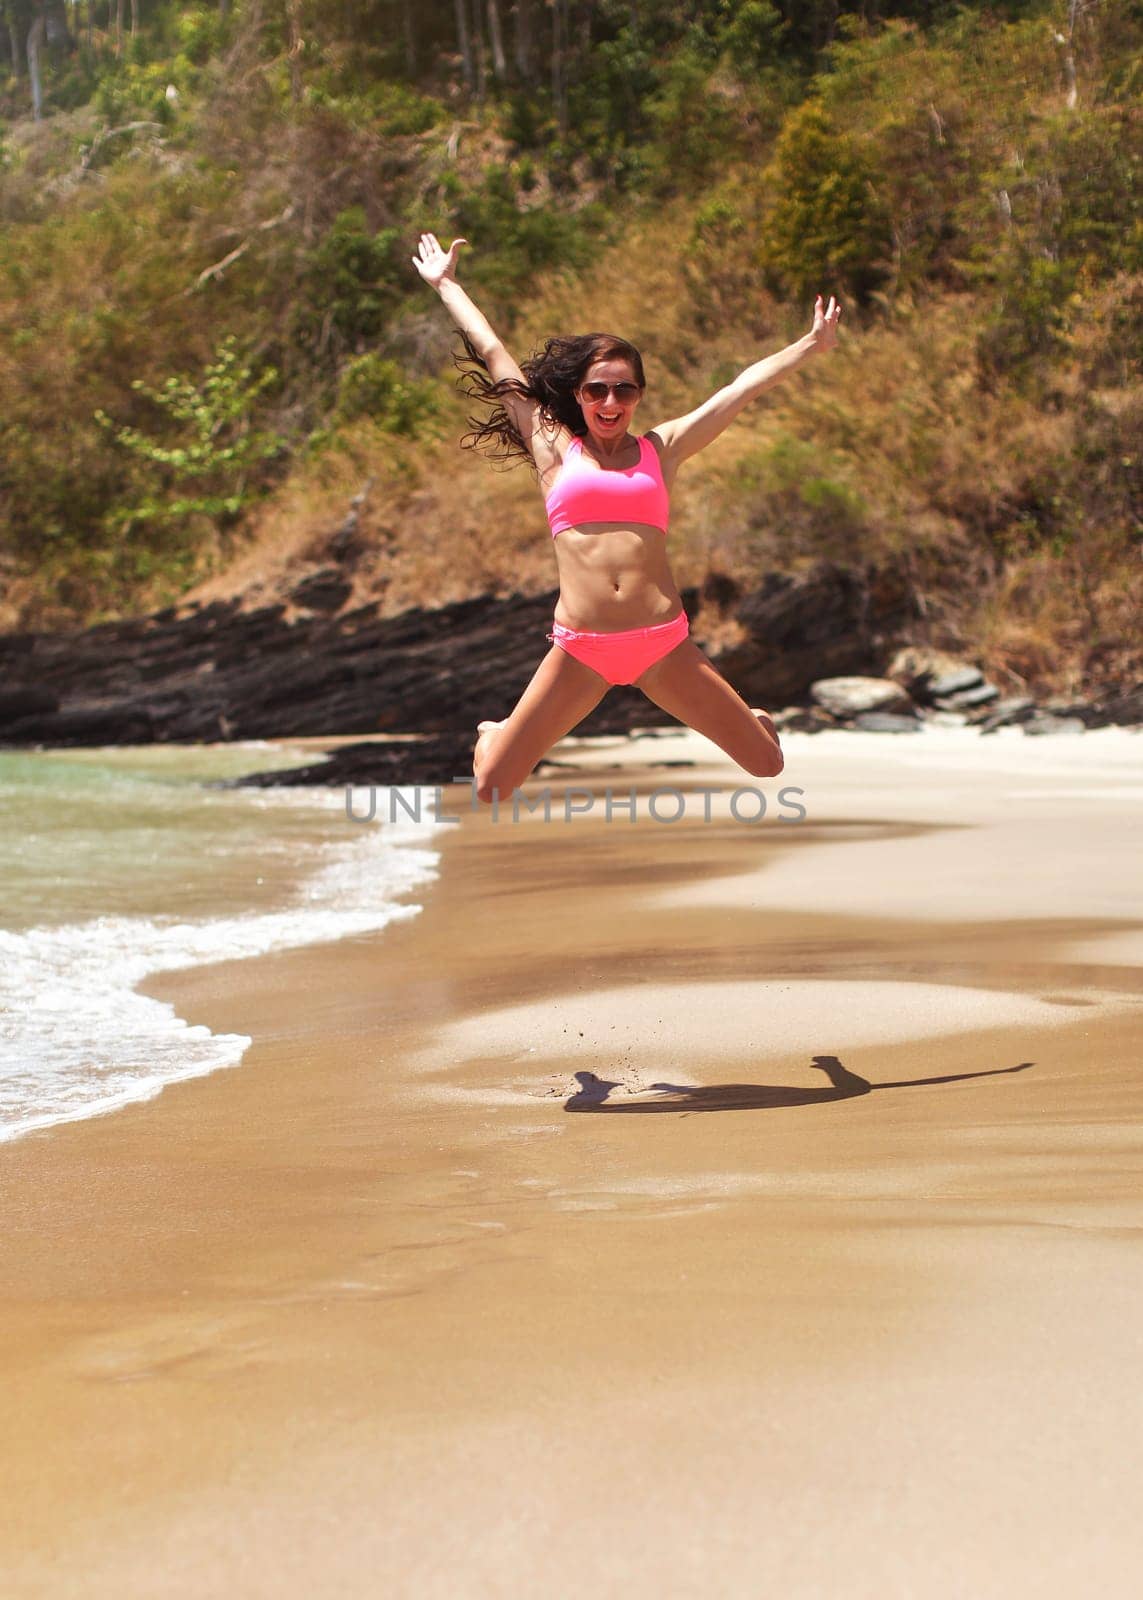 Young woman in pink bikini, wearing sunglasses, jumping high over smooth sand beach, her arms spread - looking happy